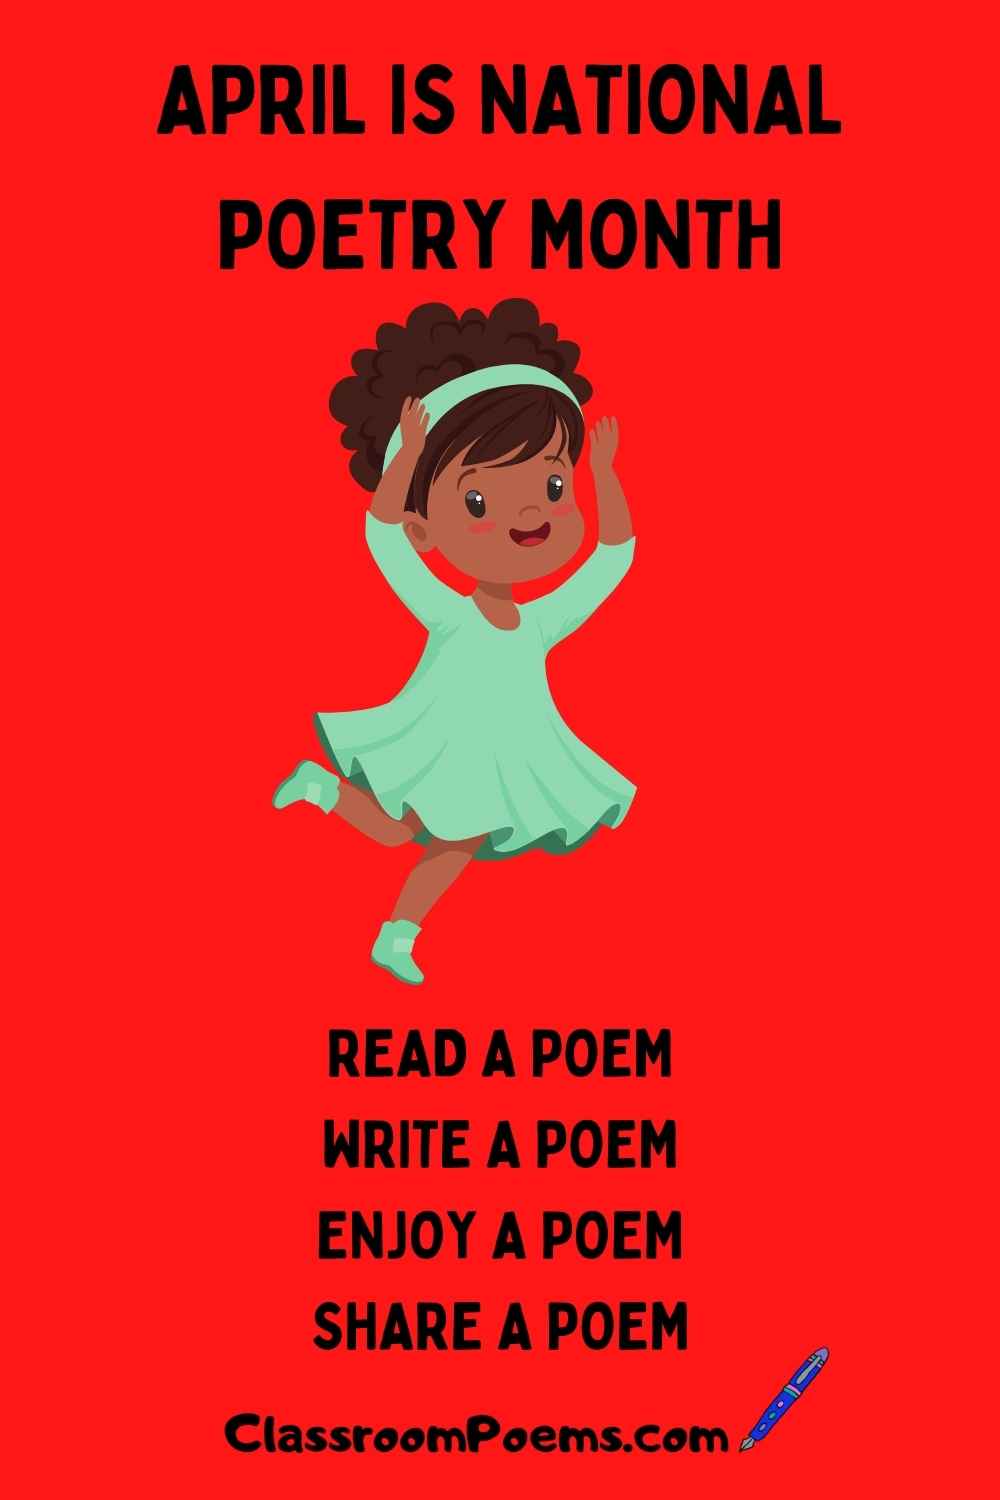 April is Poetry Month, Enjoy a poem for poetry month, national poetry month, classroompoems.com